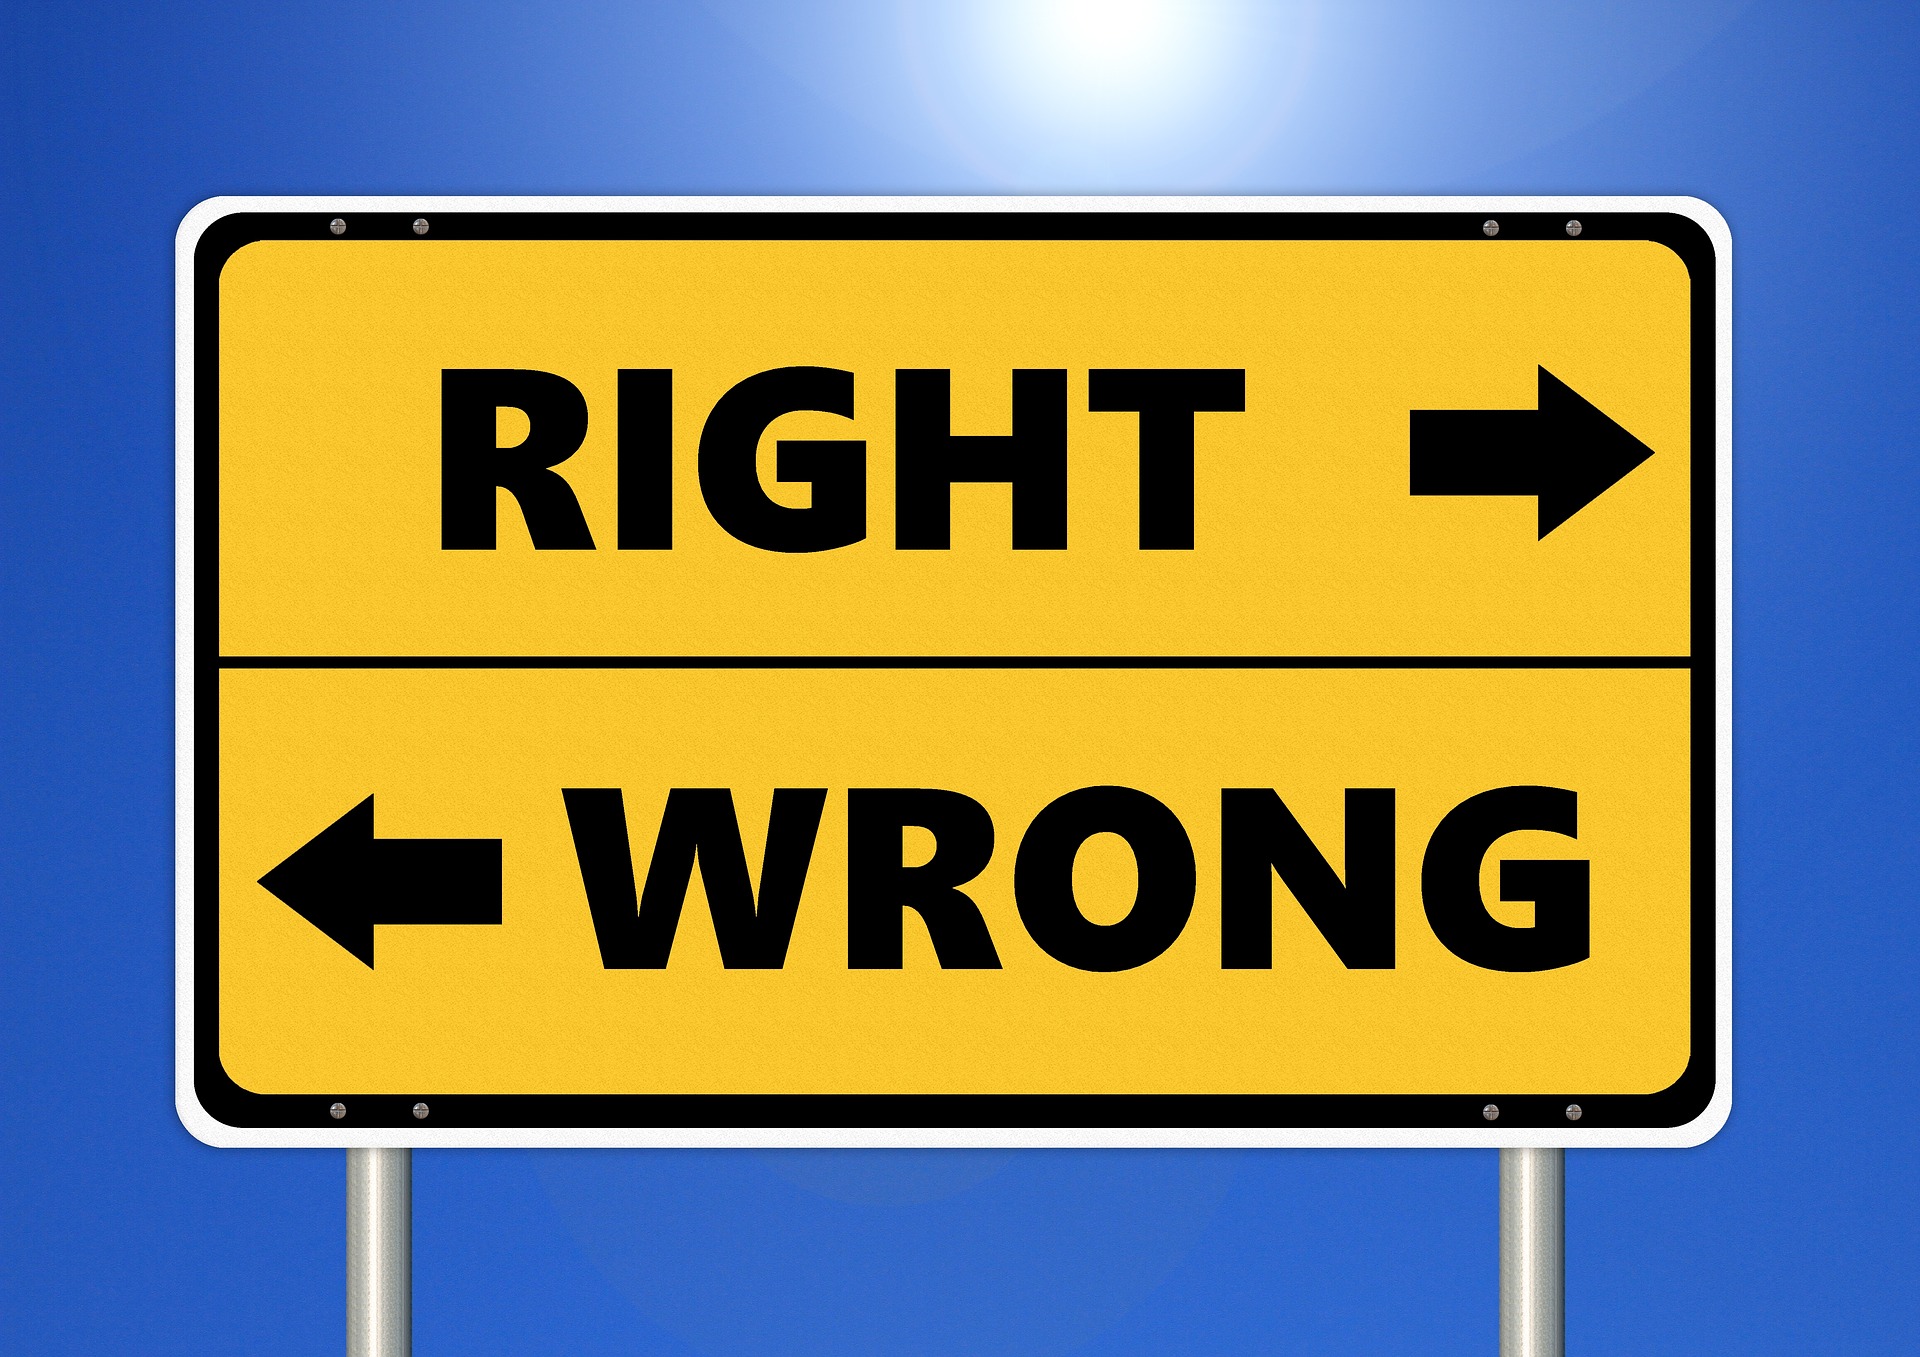 signpost showing right and wrong